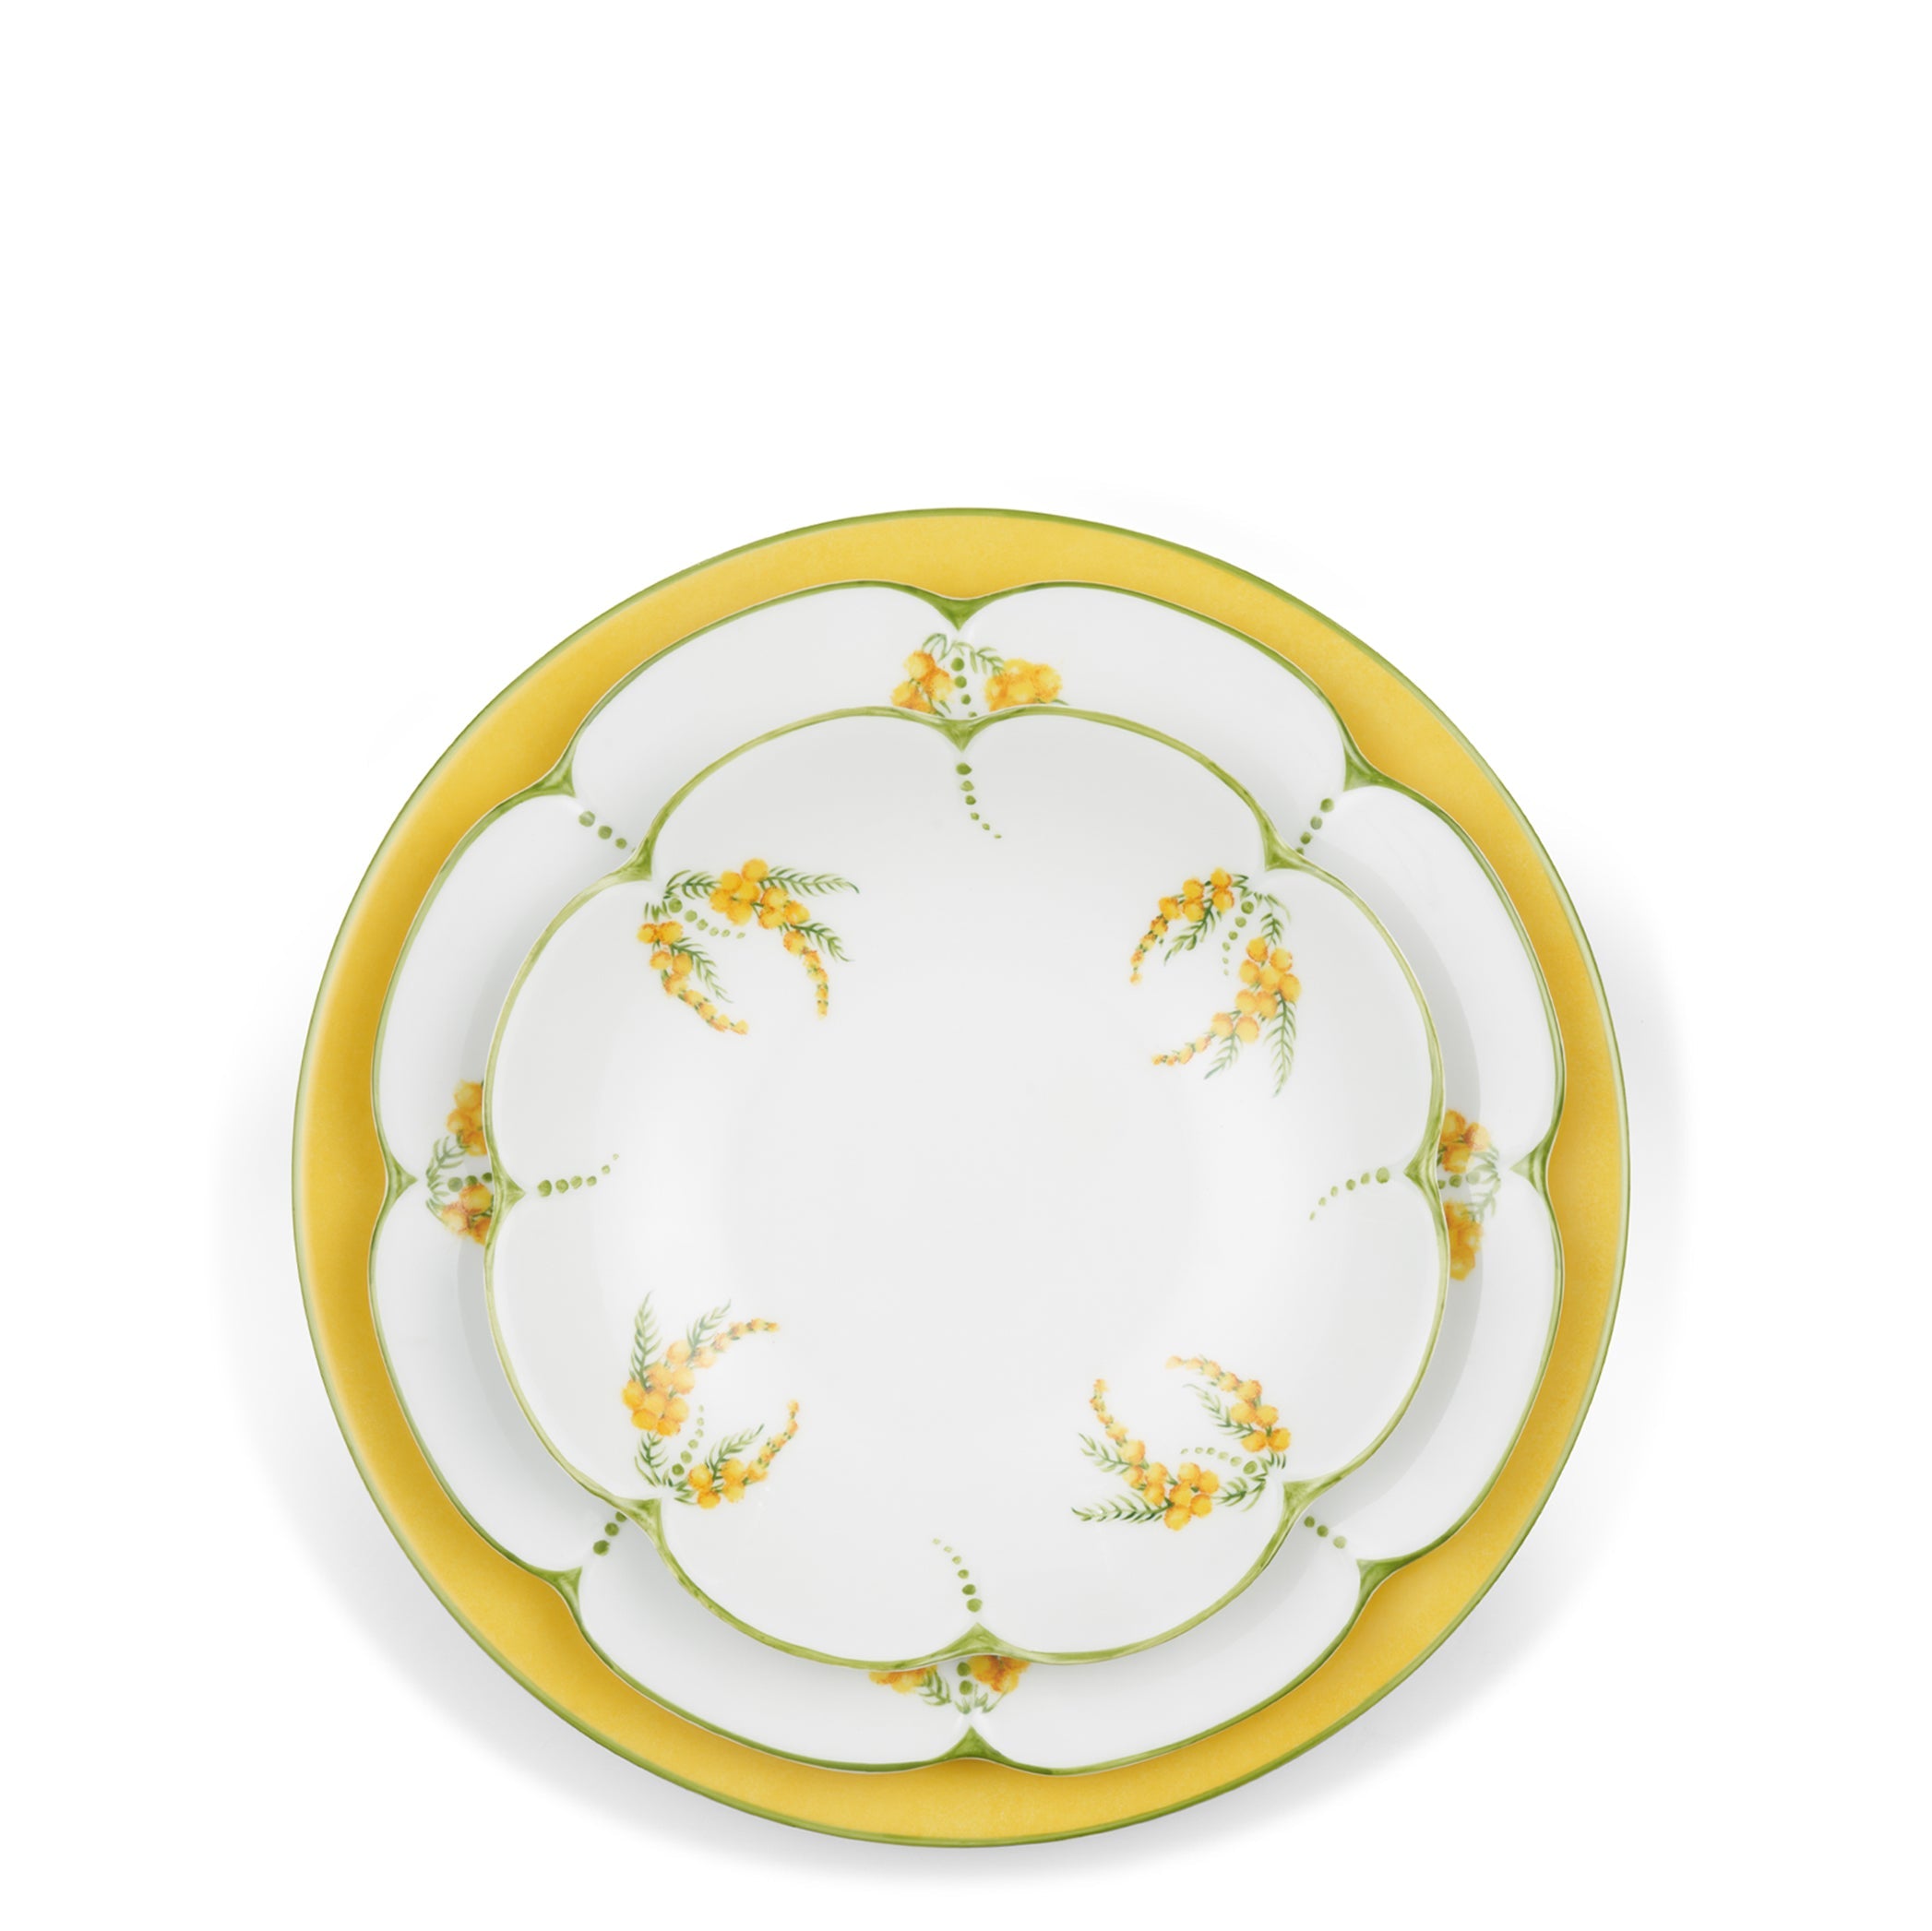 Mimosa Scalloped Hand-painted Porcelain Soup Plate, 21cm